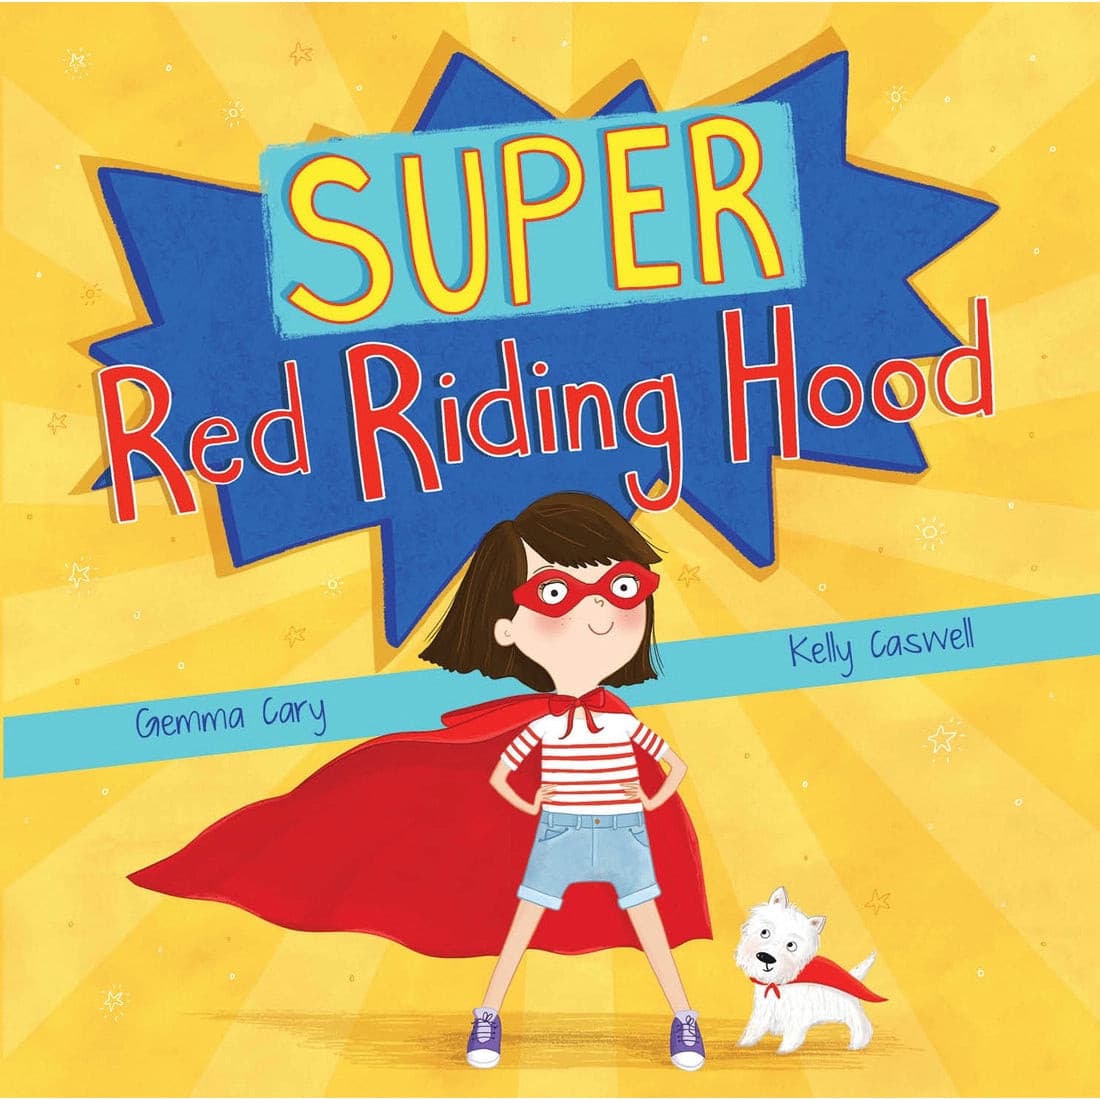 Super Red Riding Hood book